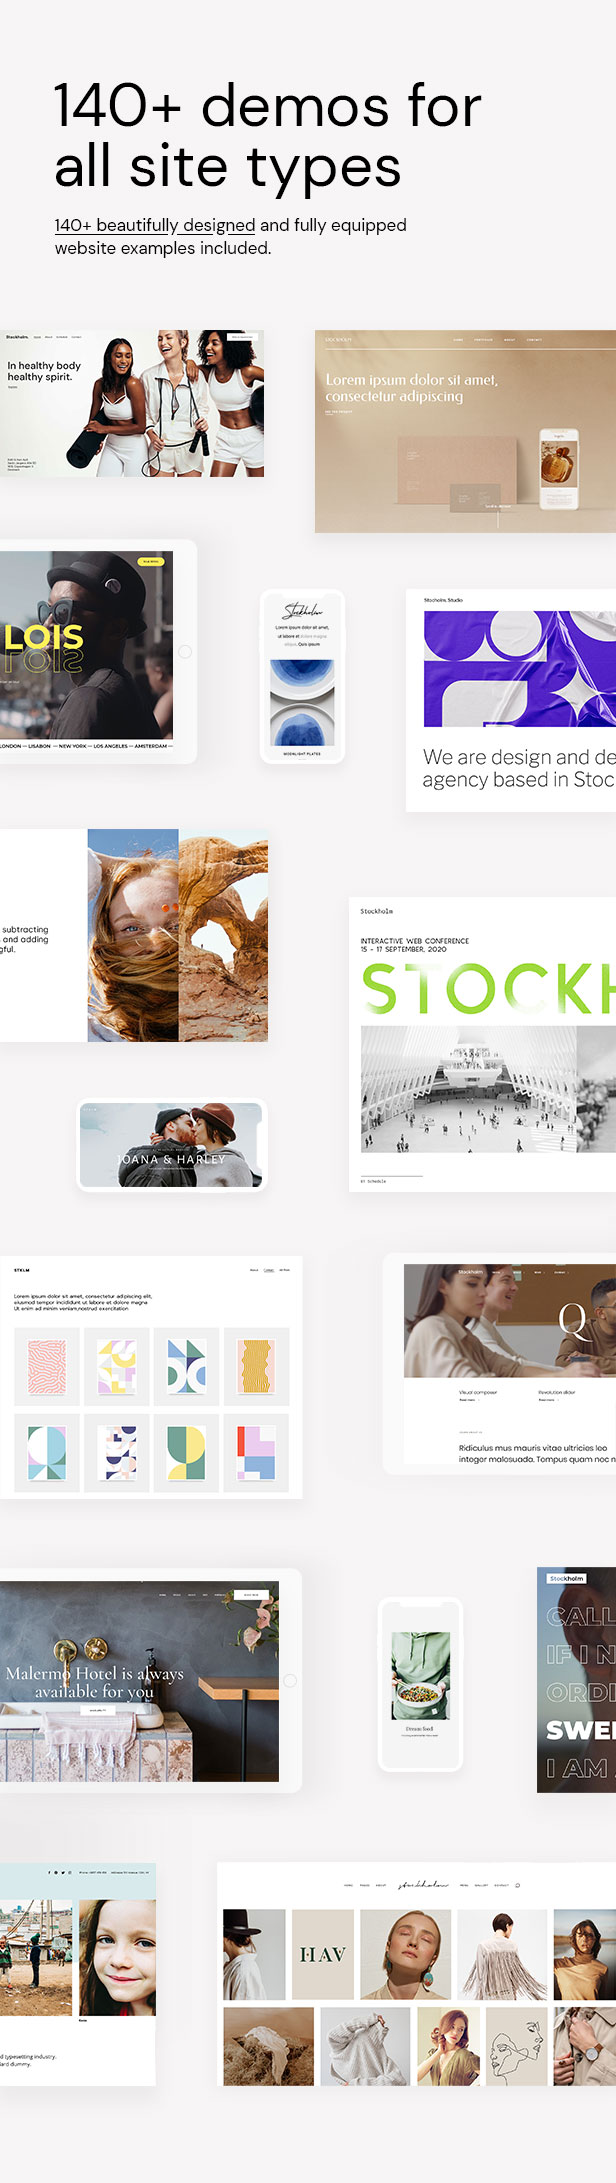 Stockholm - Elementor Theme for Creative Business & WooCommerce - 3